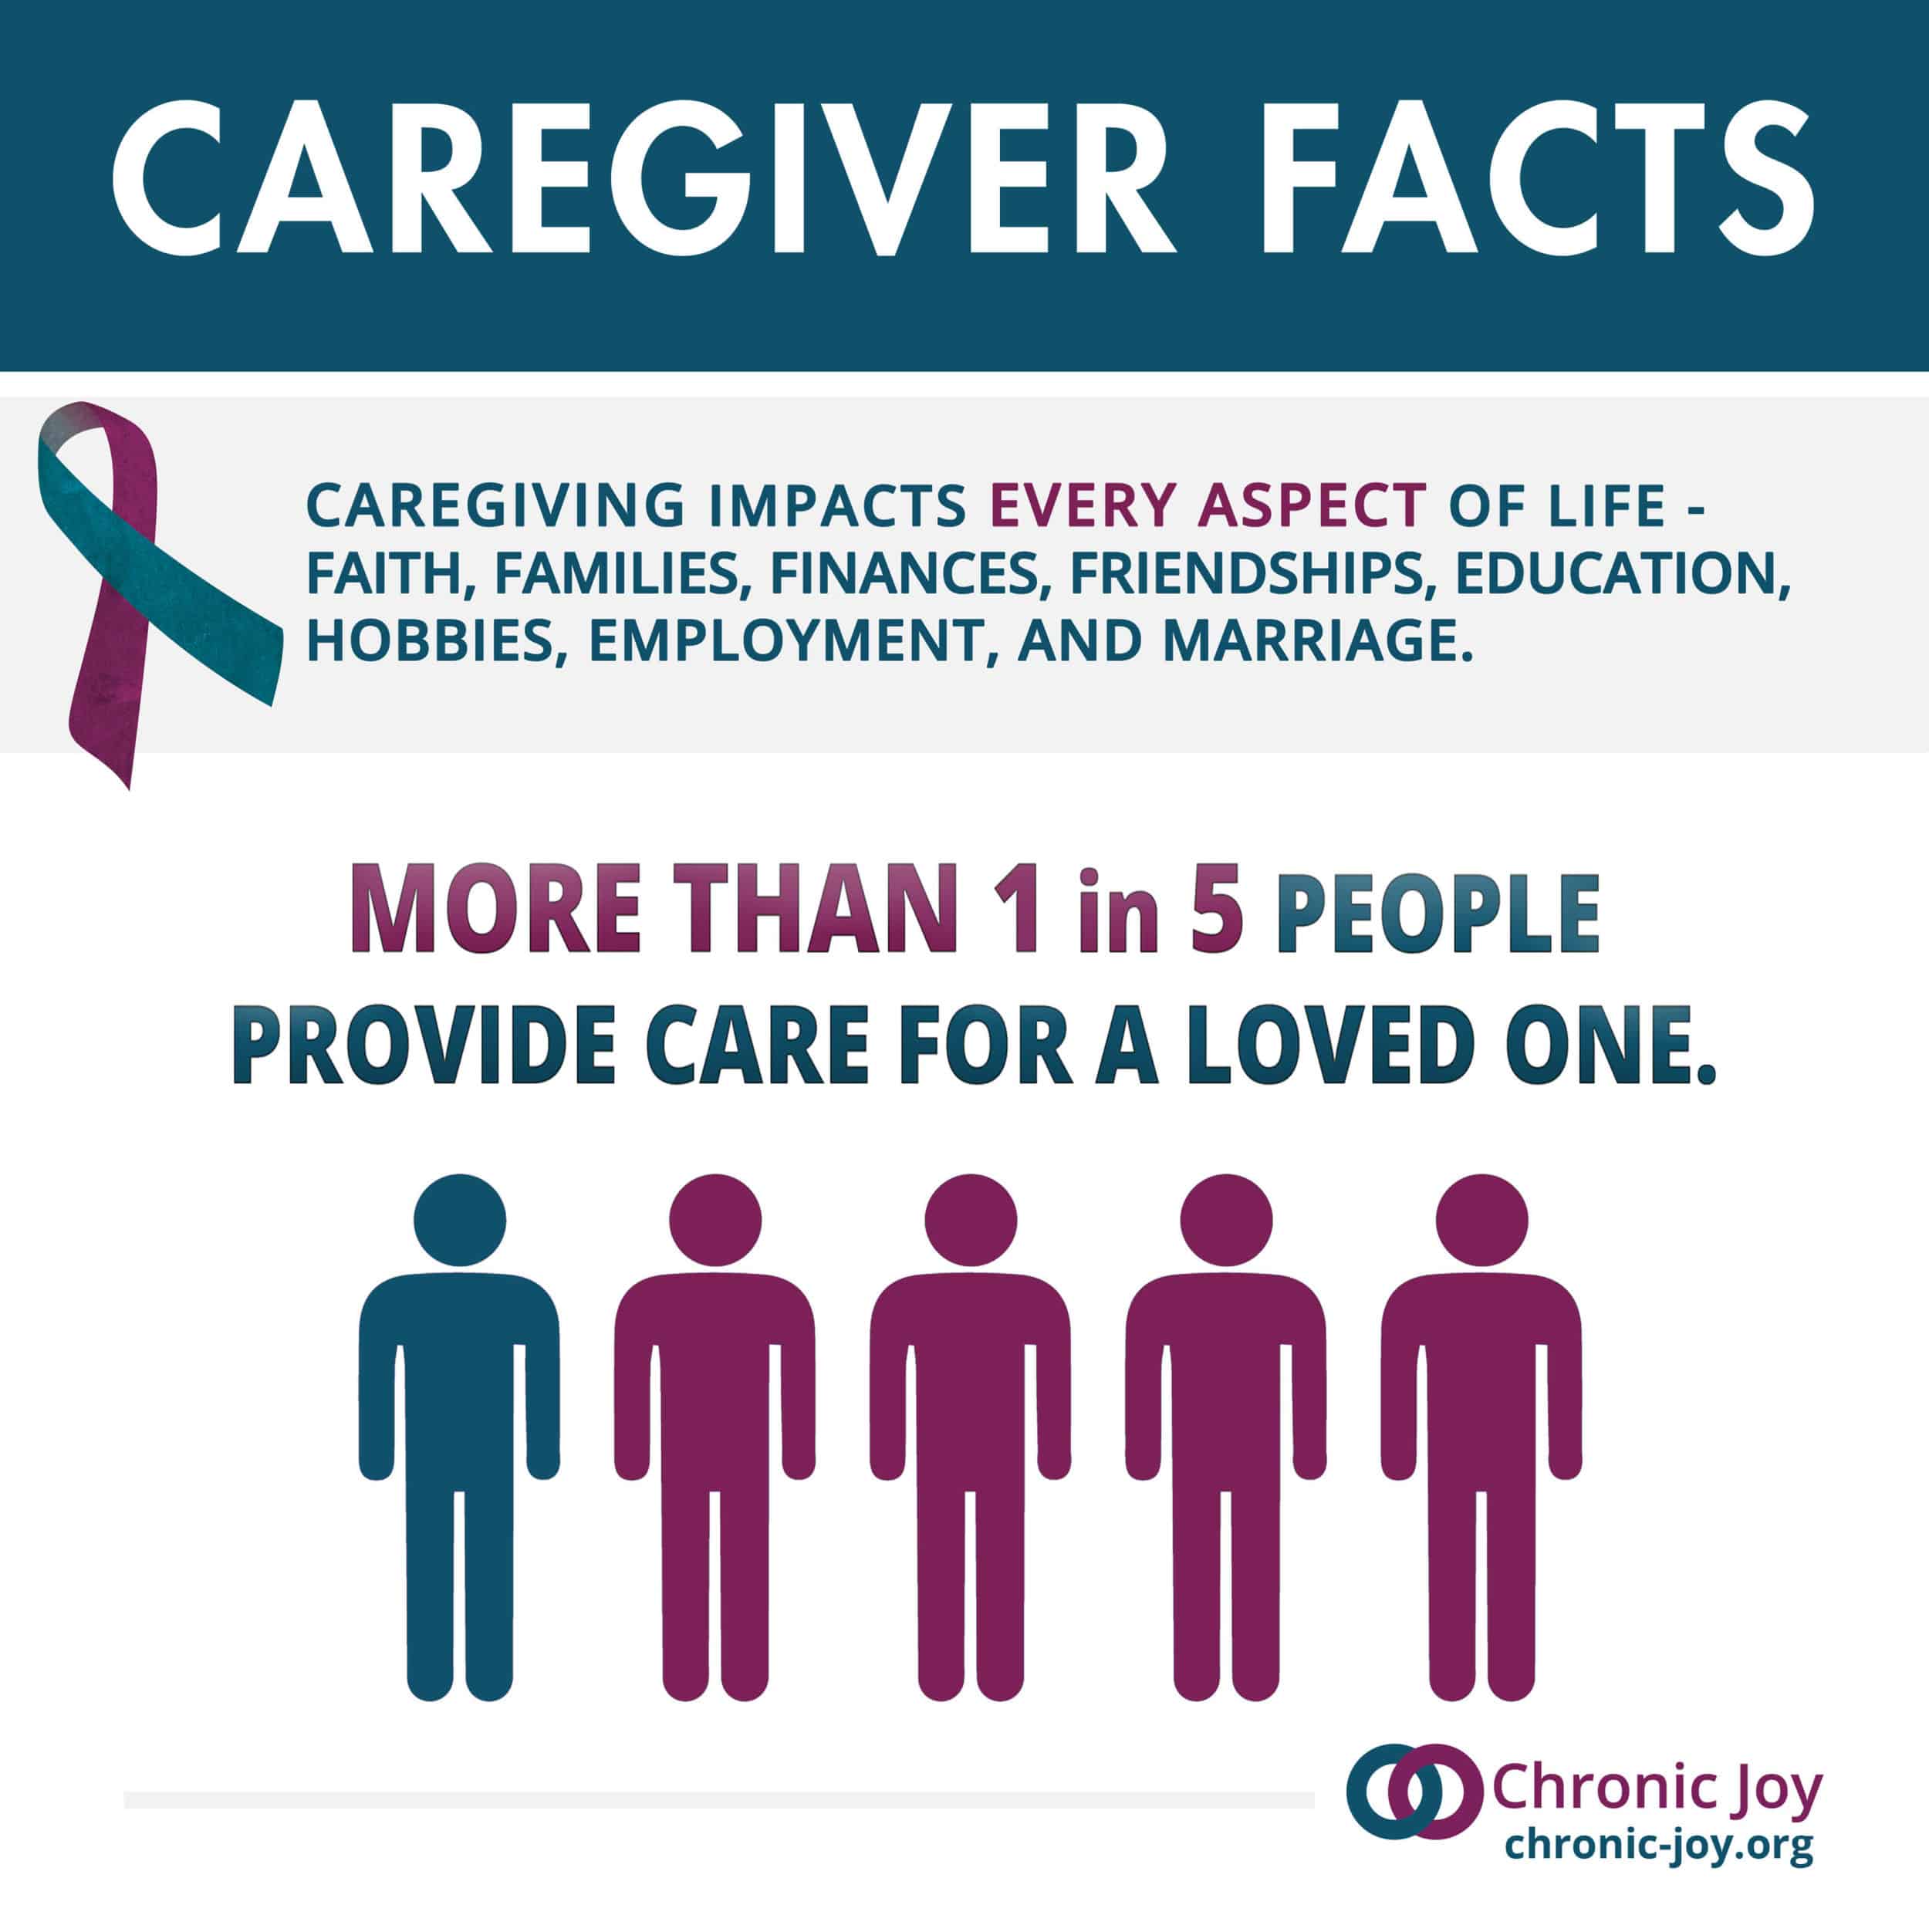 More than 1 in 5 people care for a loved one.